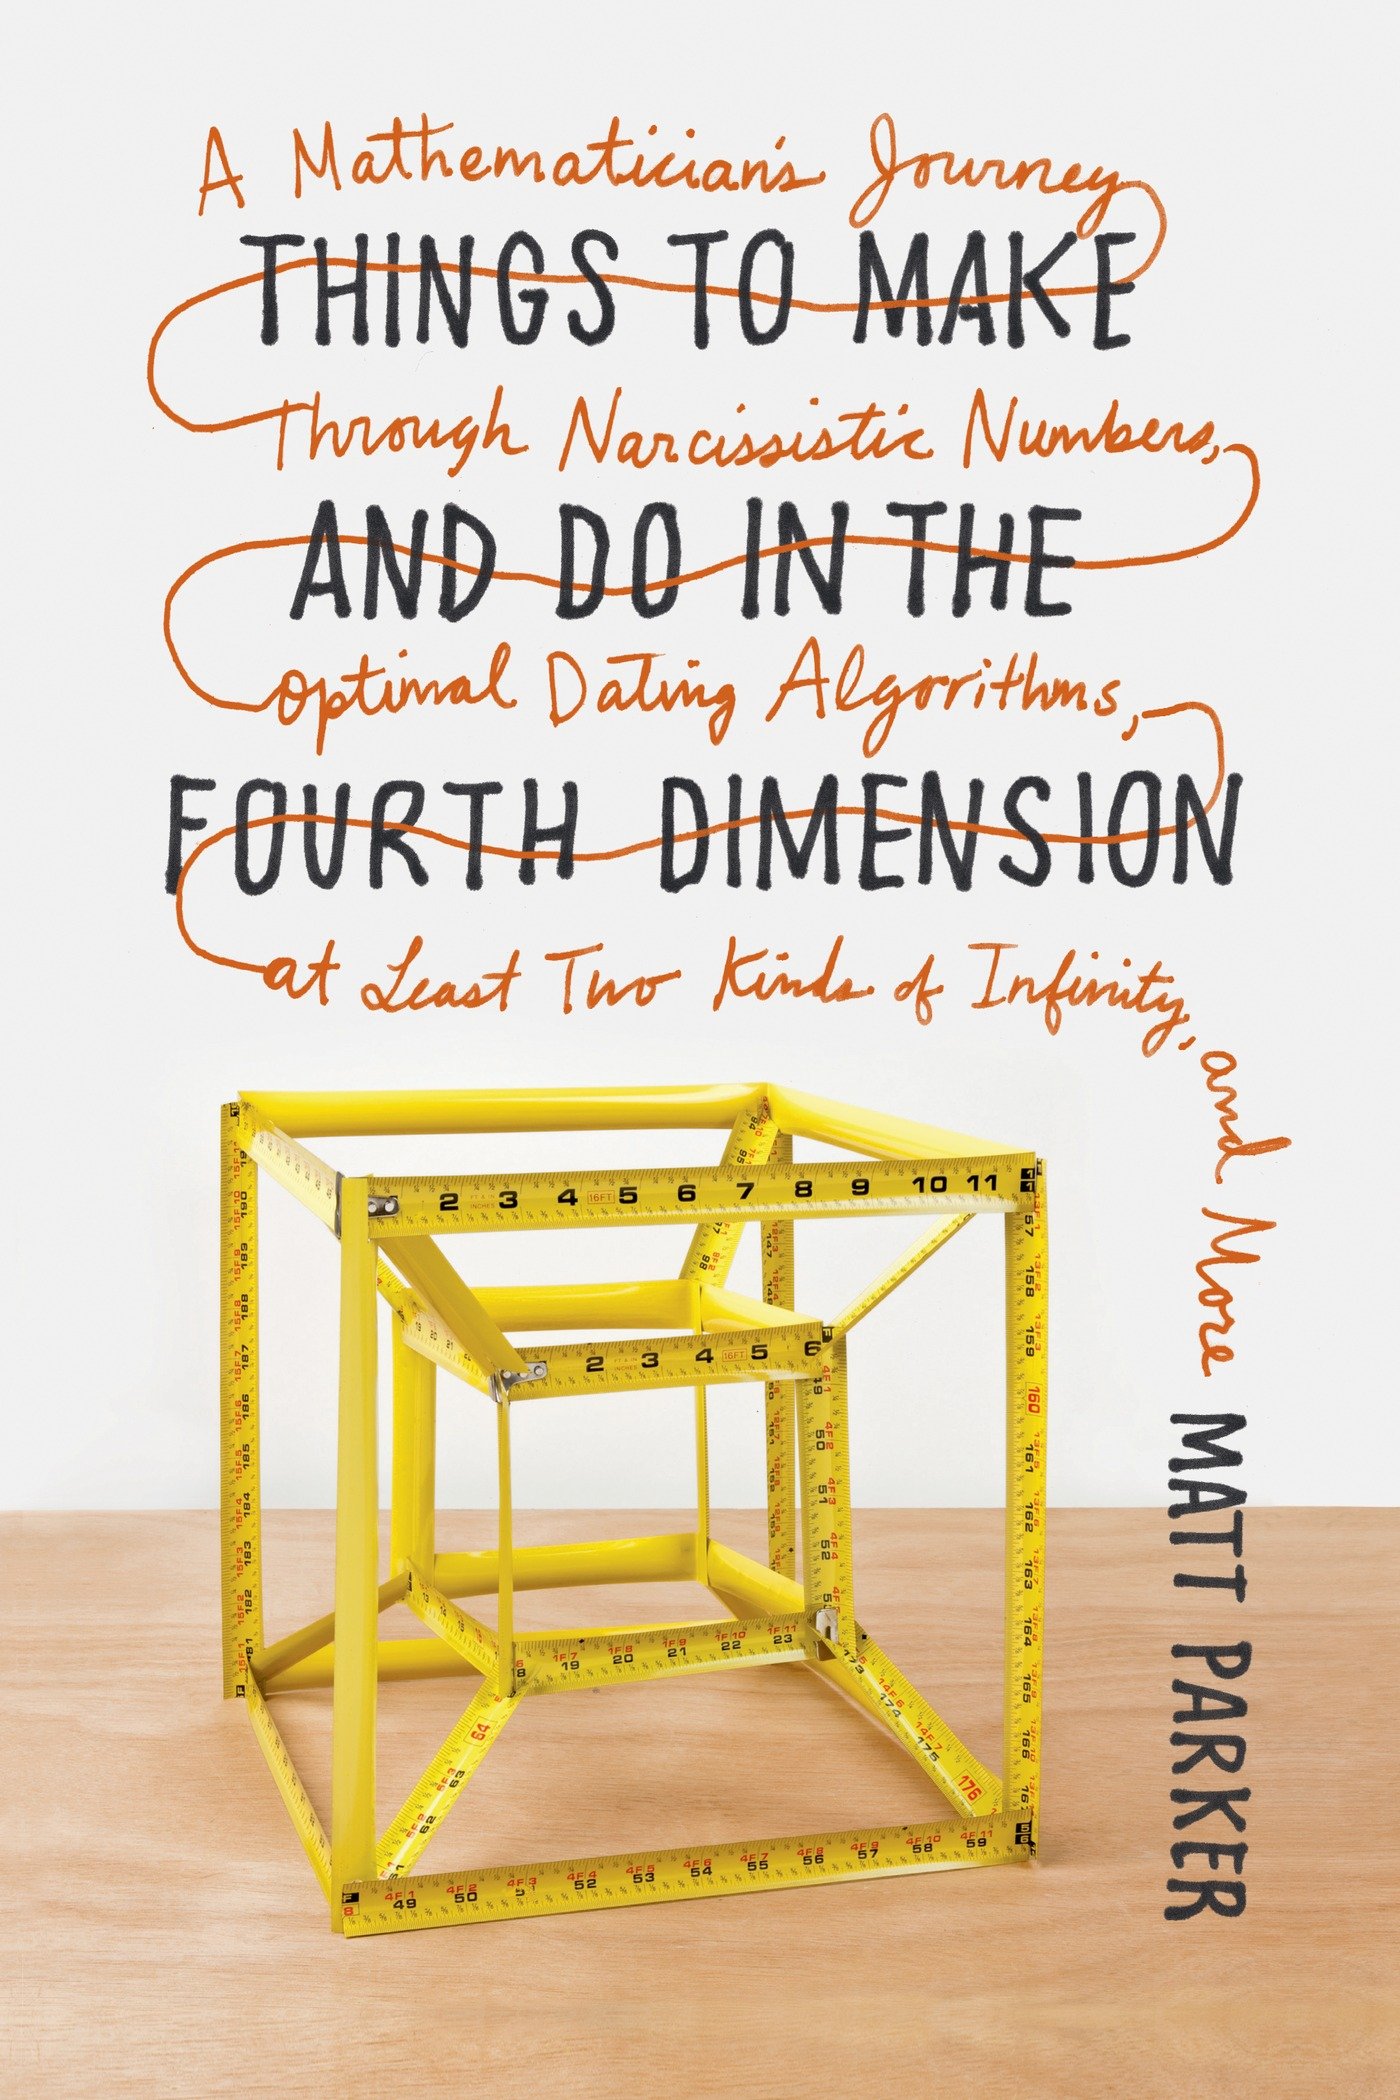 Cover of Things to Make and Do in the Fourth Dimension